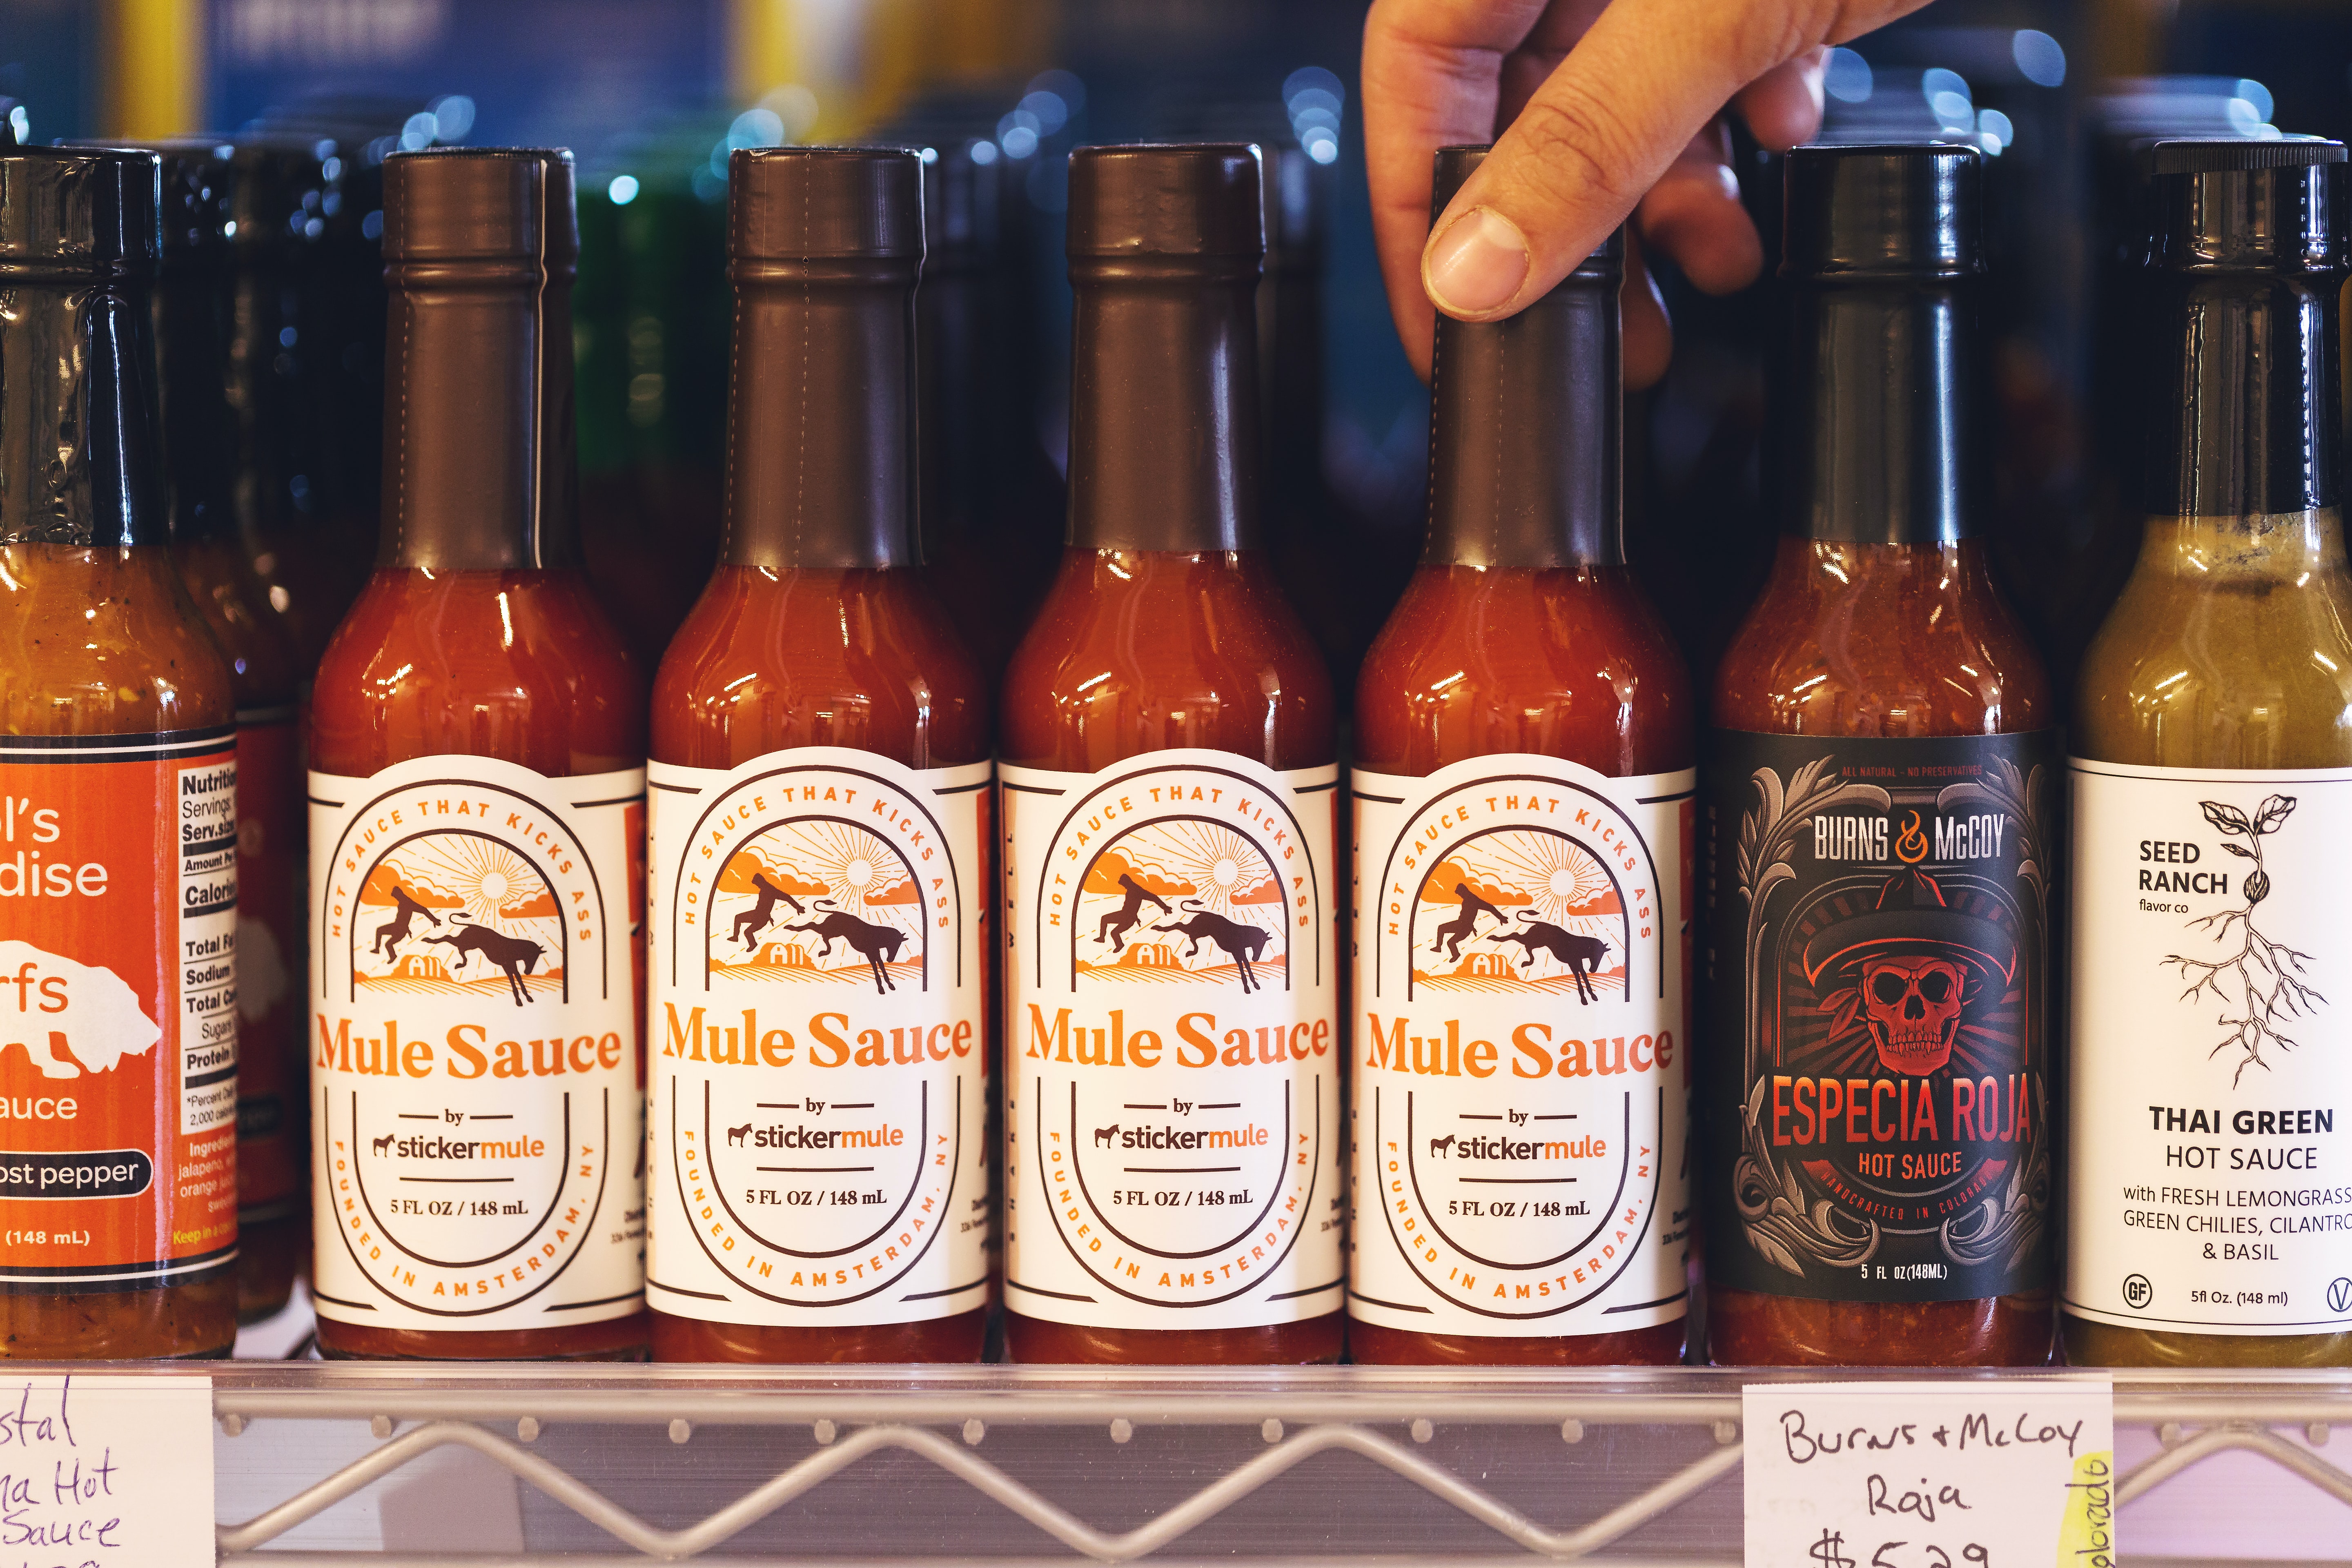 Food brokers find innovative CPGs — like the hot sauce brands shown here